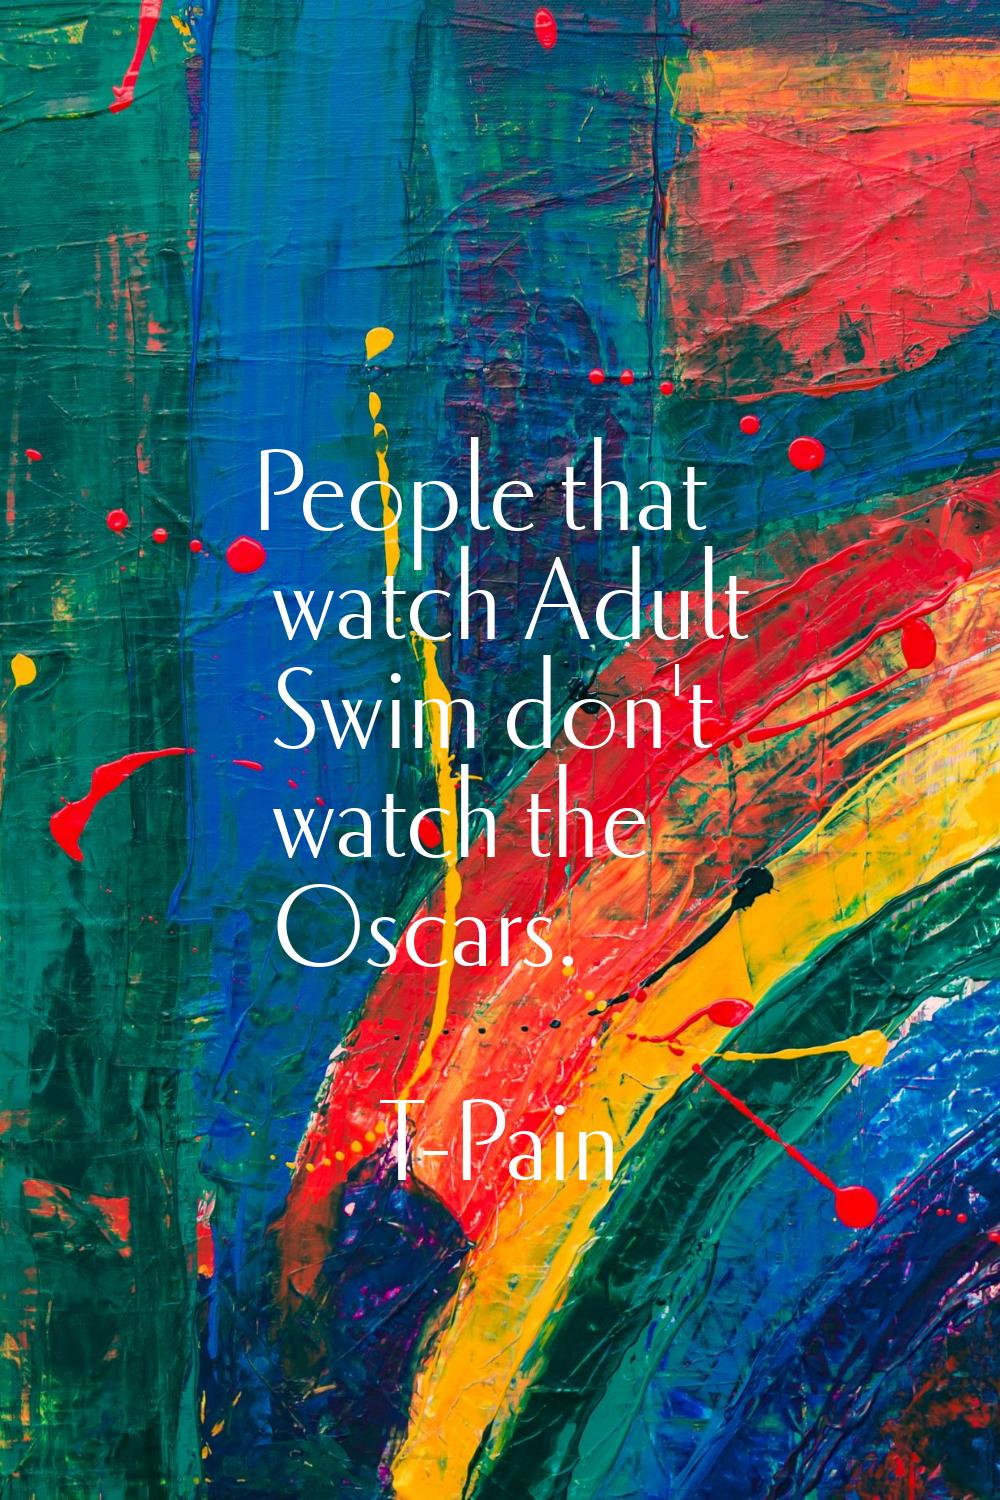 People that watch Adult Swim don't watch the Oscars.